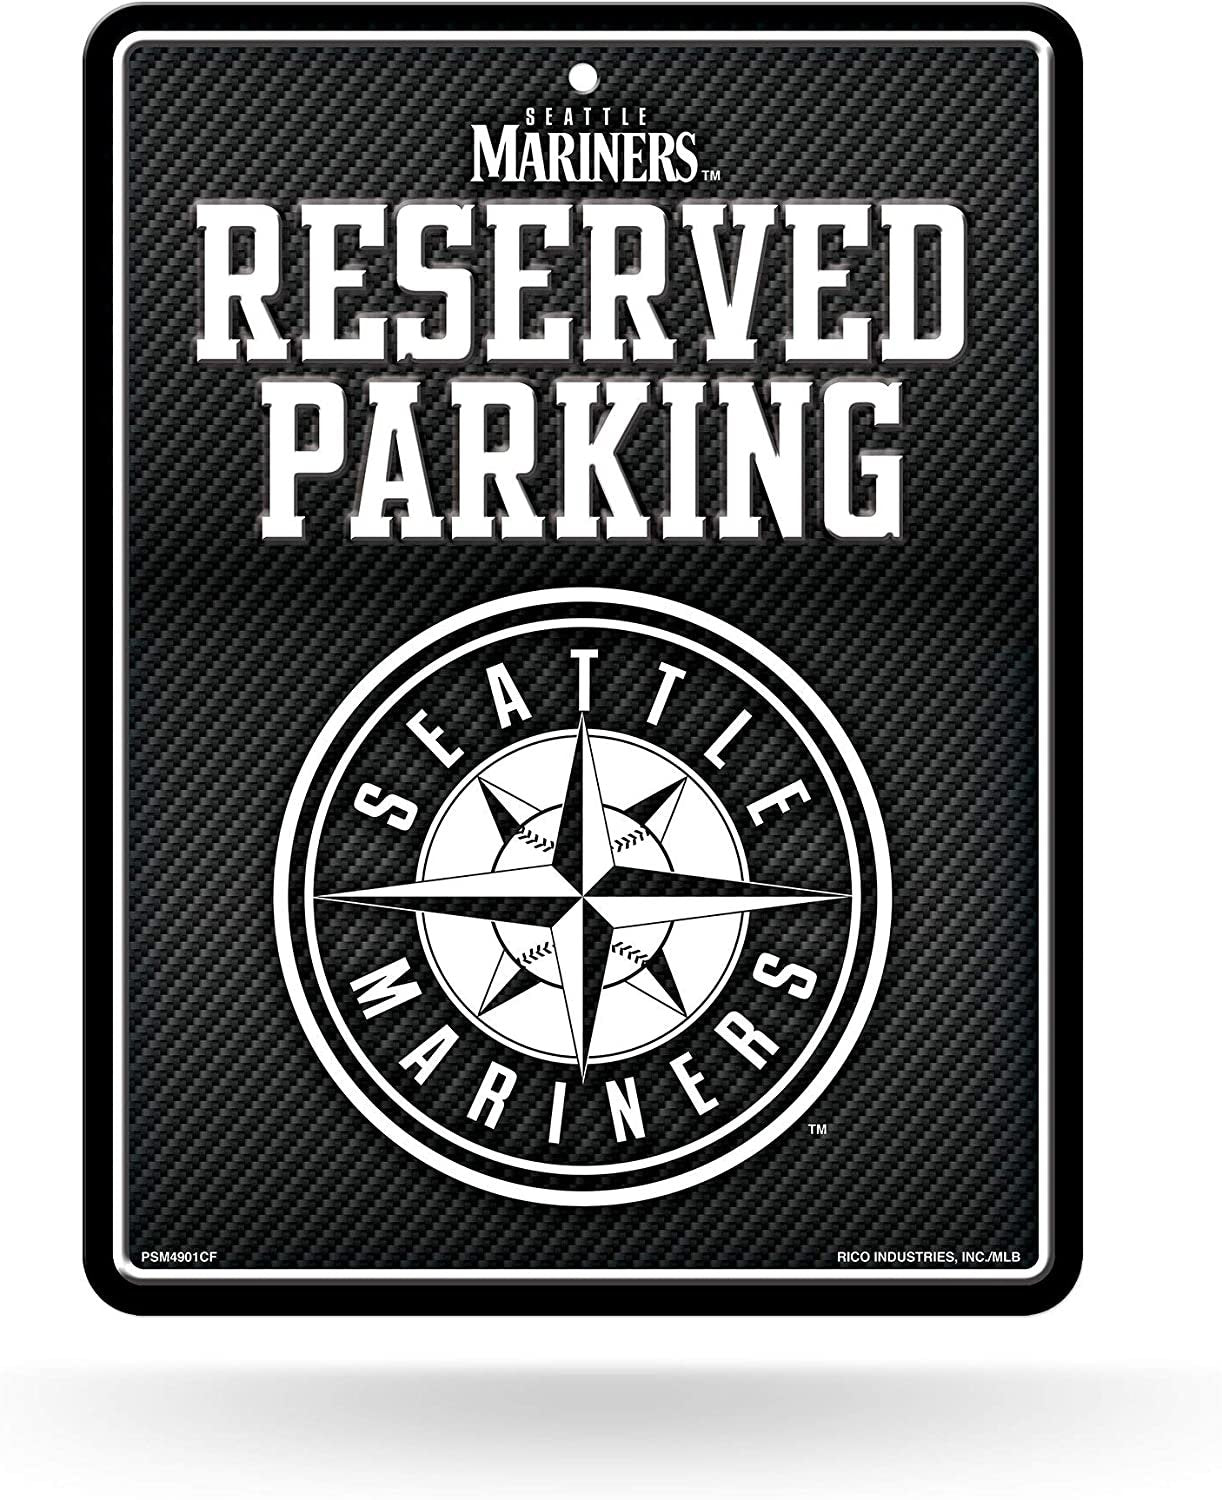 Seattle Mariners Metal Parking Novelty Wall Sign 8.5 x 11 Inch Carbon Fiber Design